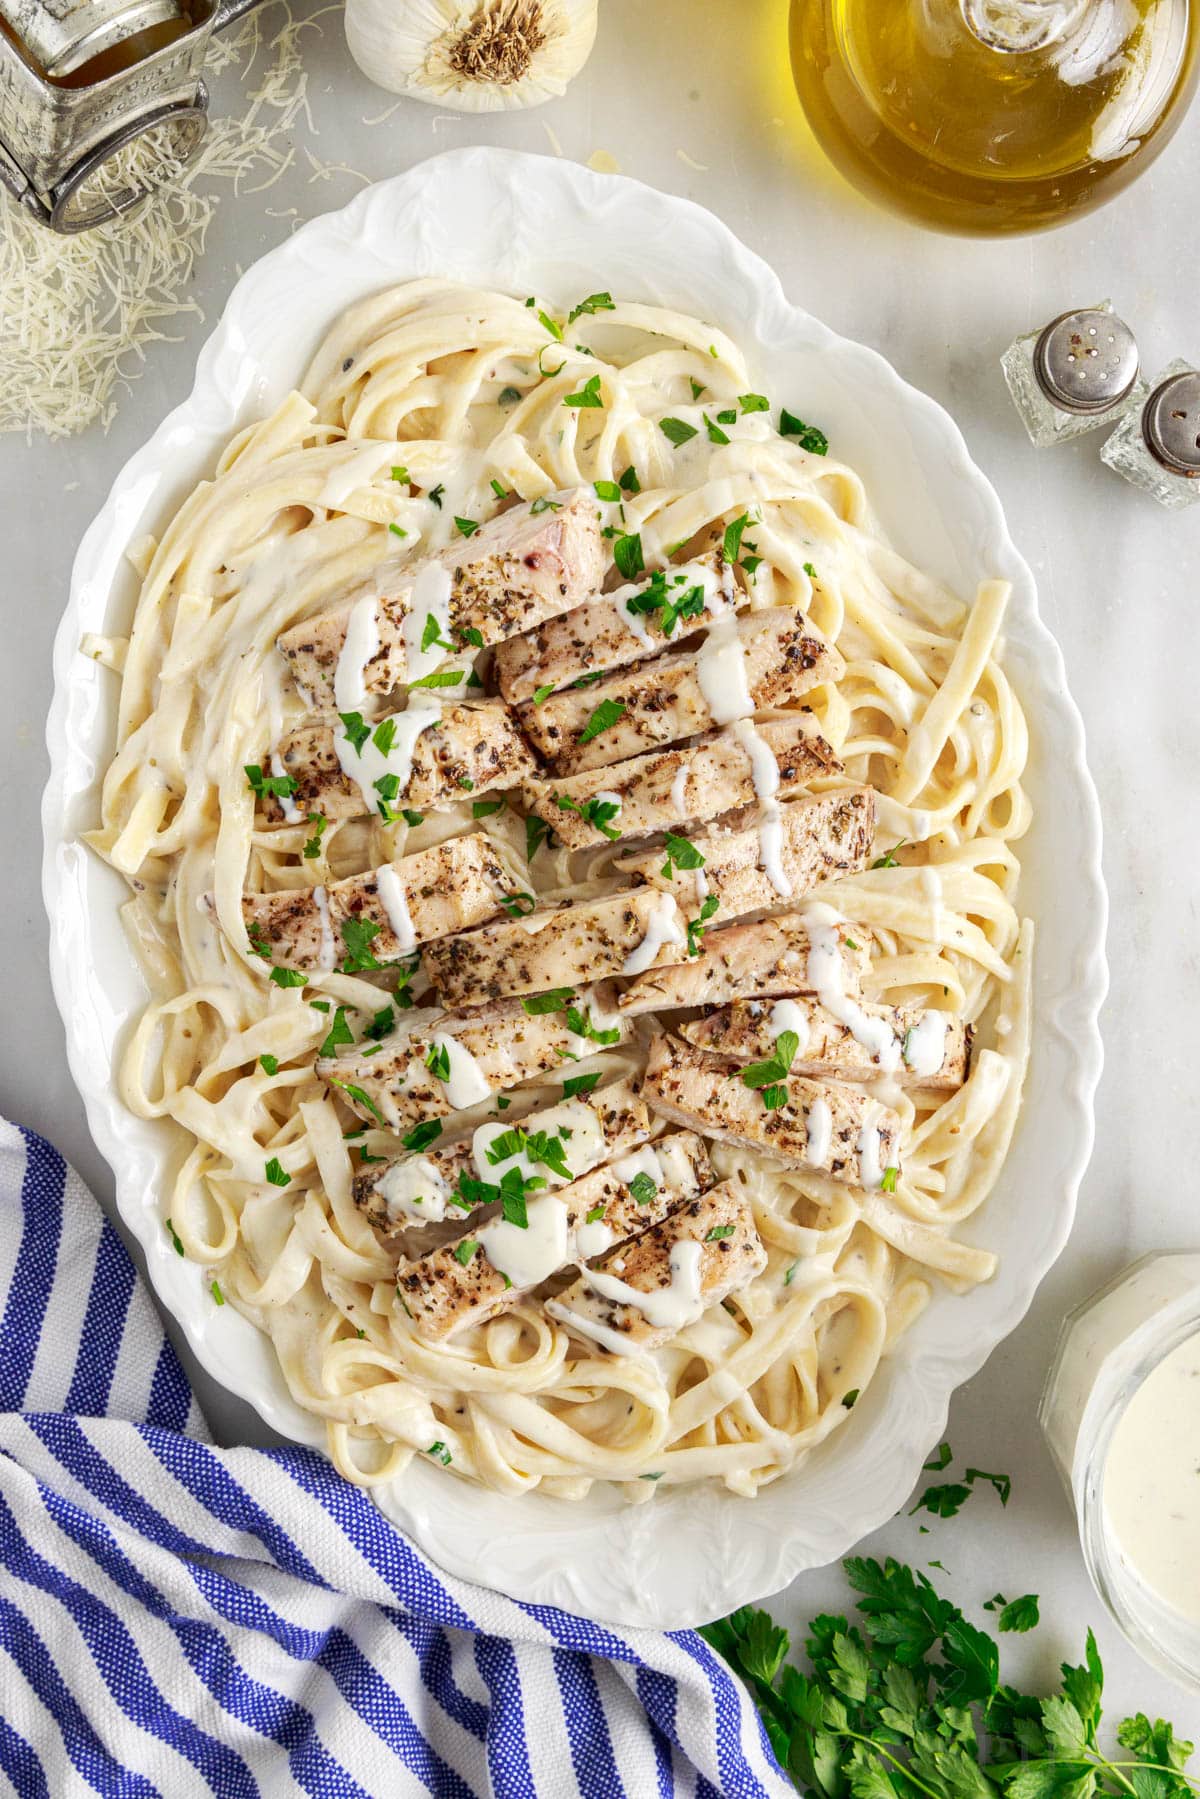 top whole view of oval white plate of grilled chicken alfredo